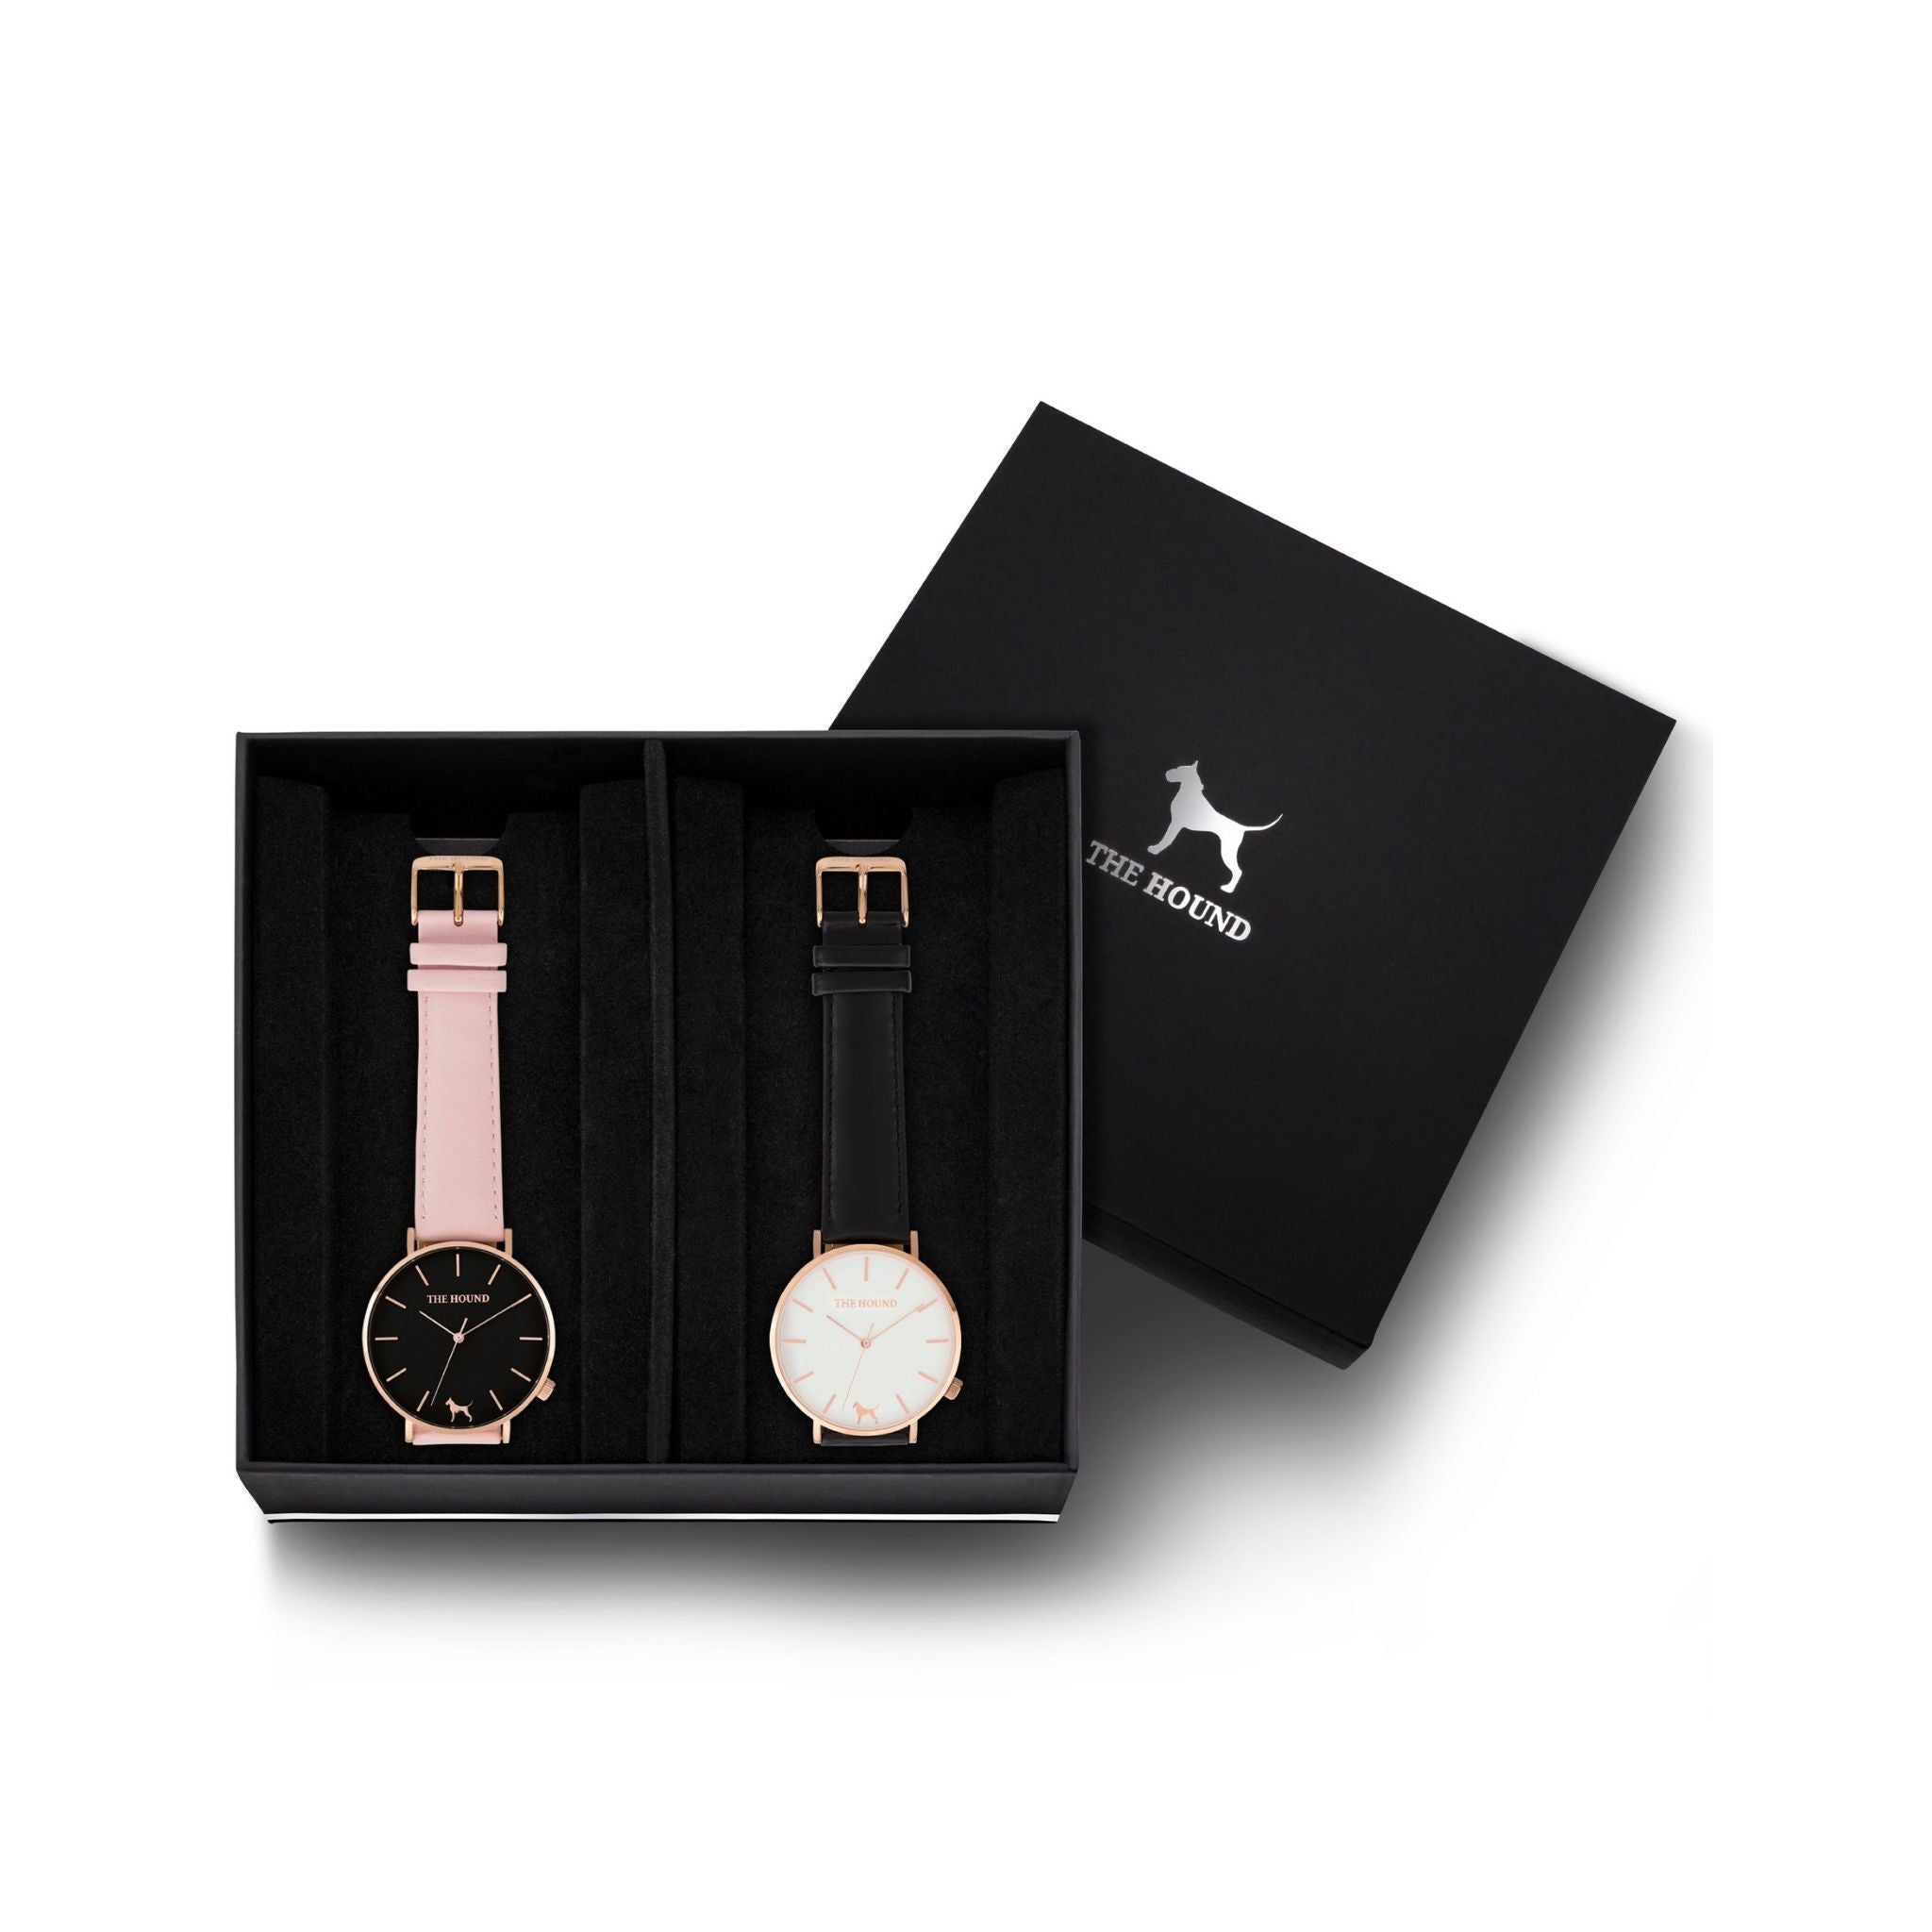 Custom gift set - Rose gold and black watch with stitched blush pink genuine leather band and a rose gold and white watch with stitched black genuine leather band